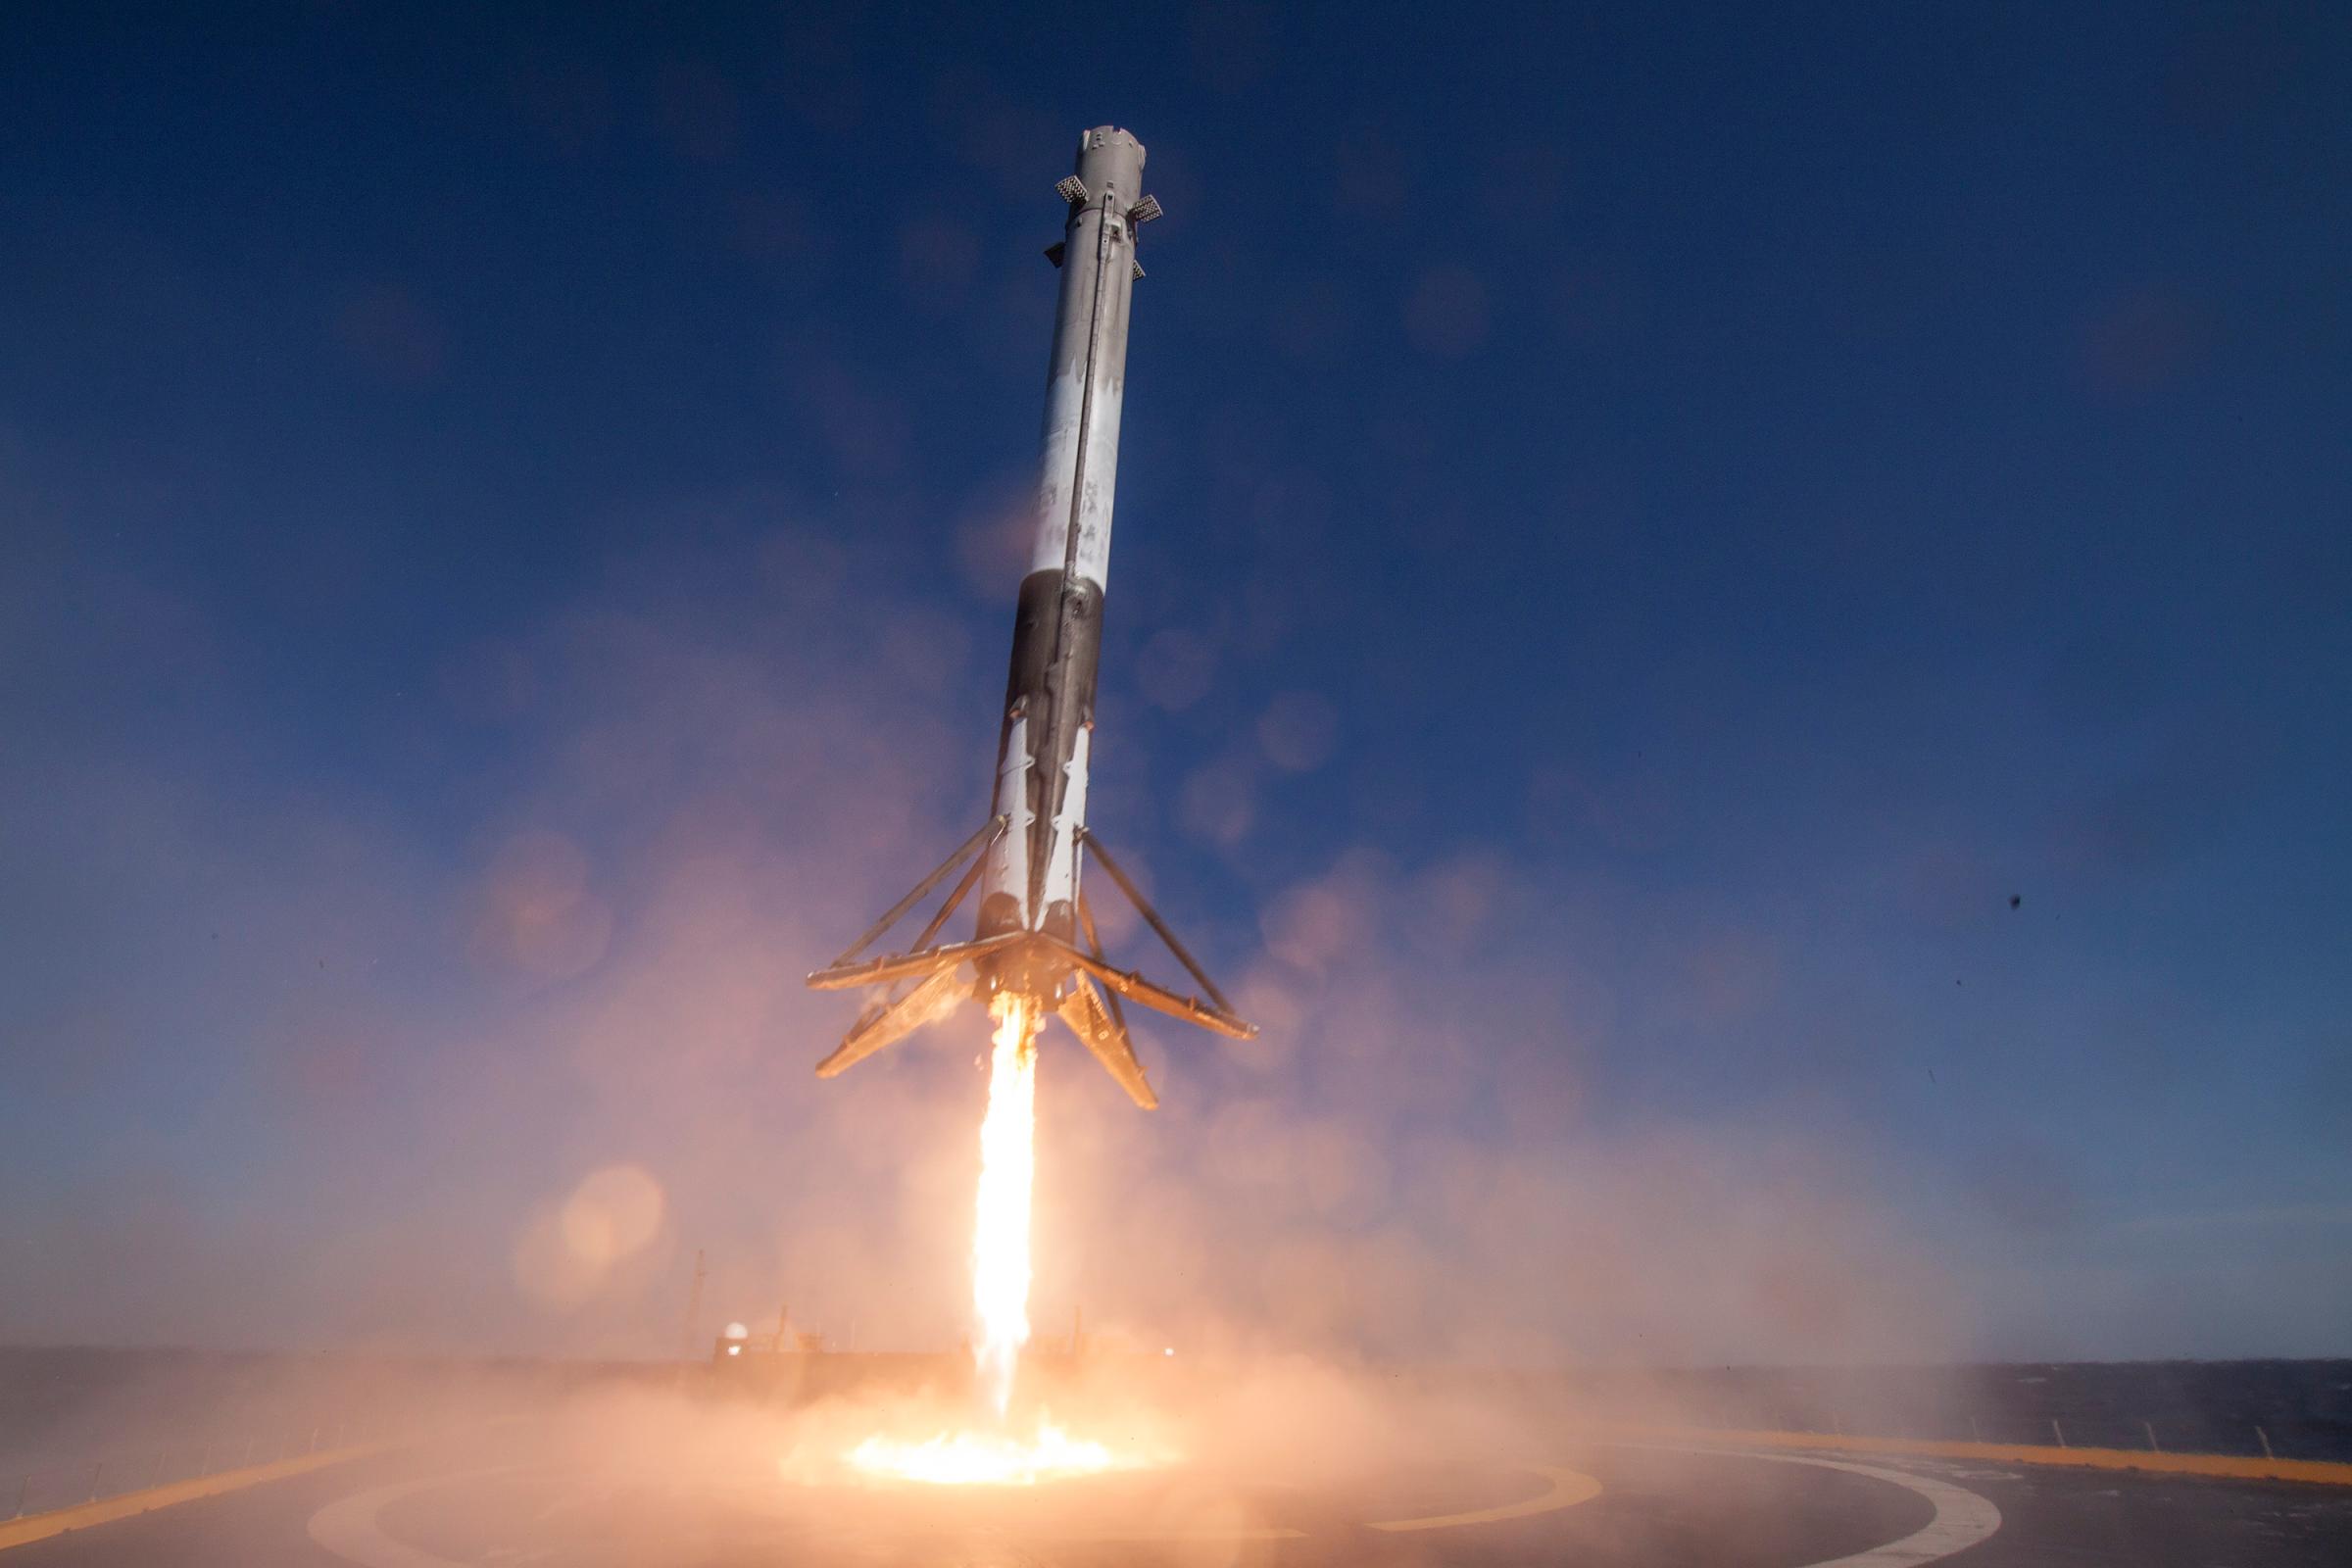 In this handout provided by the National Aeronautics and Space Administration (NASA), SpaceX's Falcon 9 rocket makes its first successful upright landing on the "Of Course I Still Love You" droneship on April 8, 2016 some 200 miles off shore in the Atlantic Ocean after launching from Cape Canaveral, Florida.